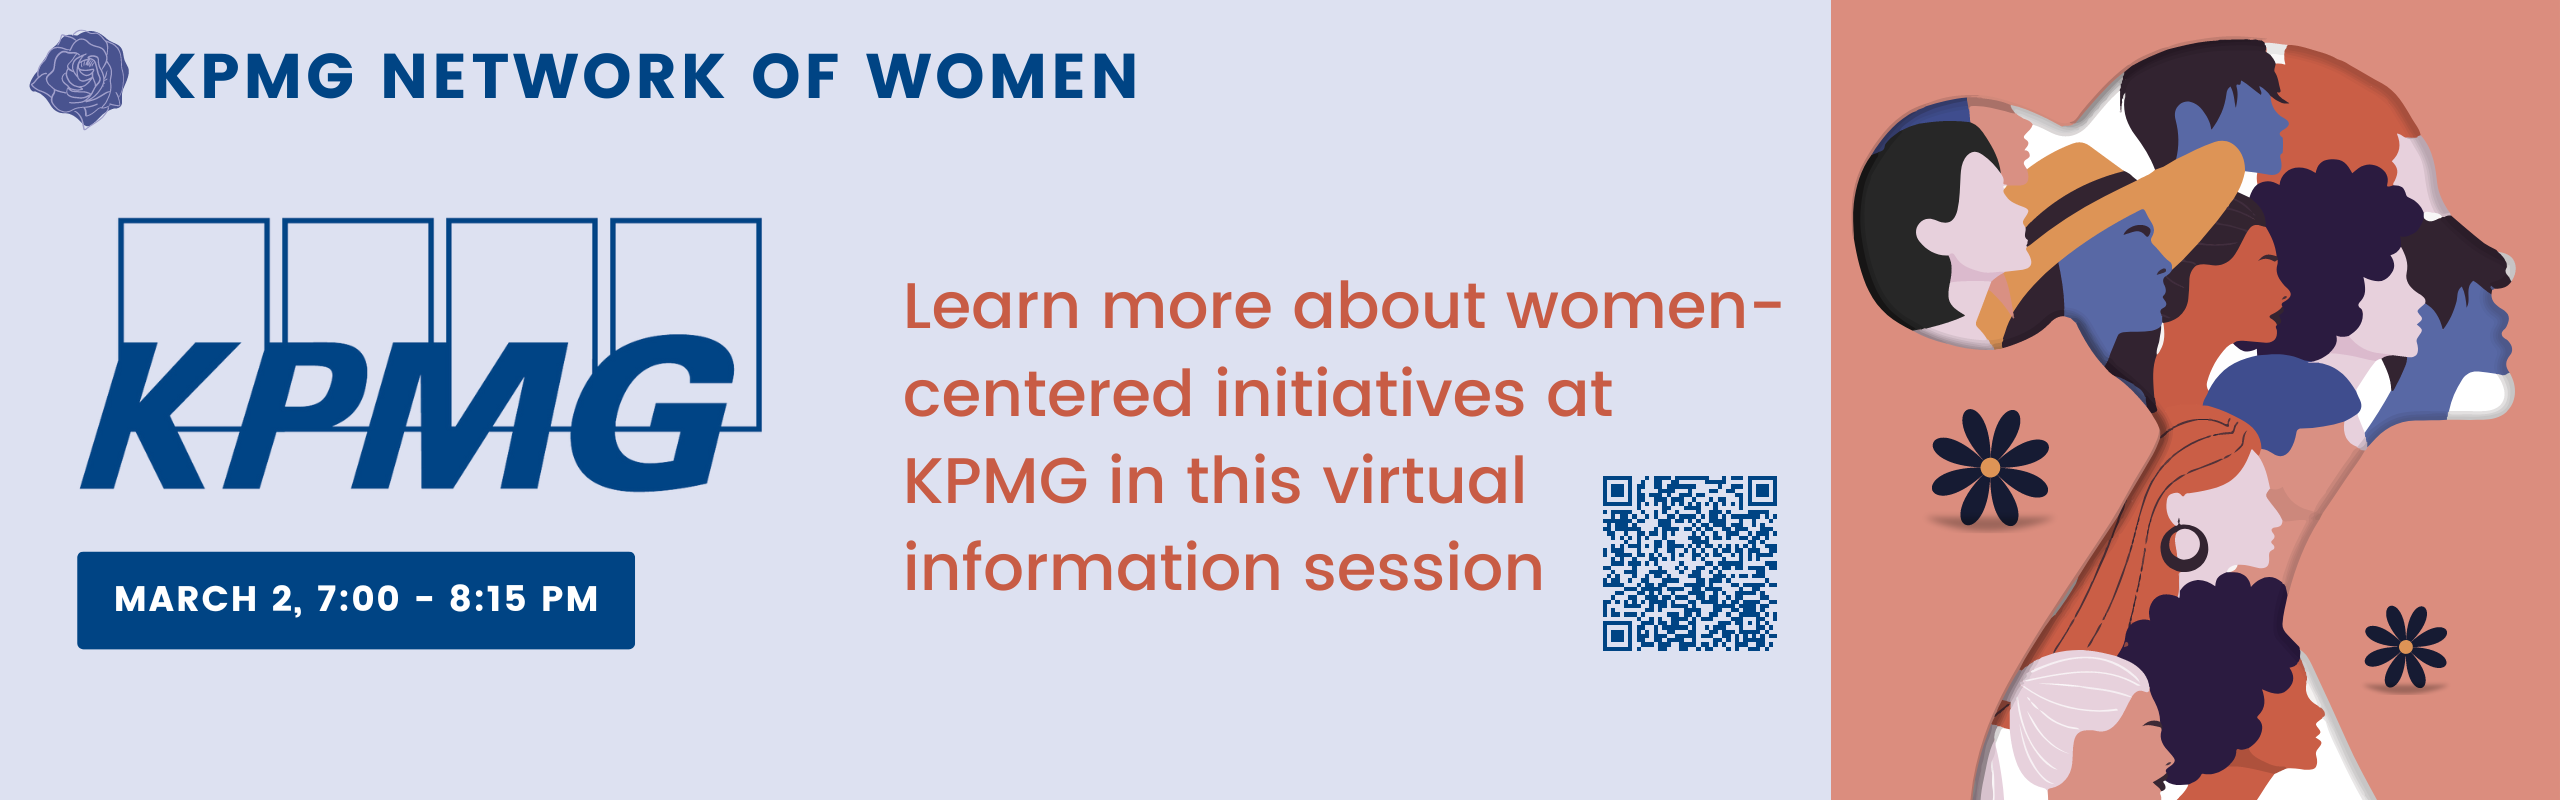 KPMG Virtual educational session March 2 at 7 pm Review the Elon Job Network for Details